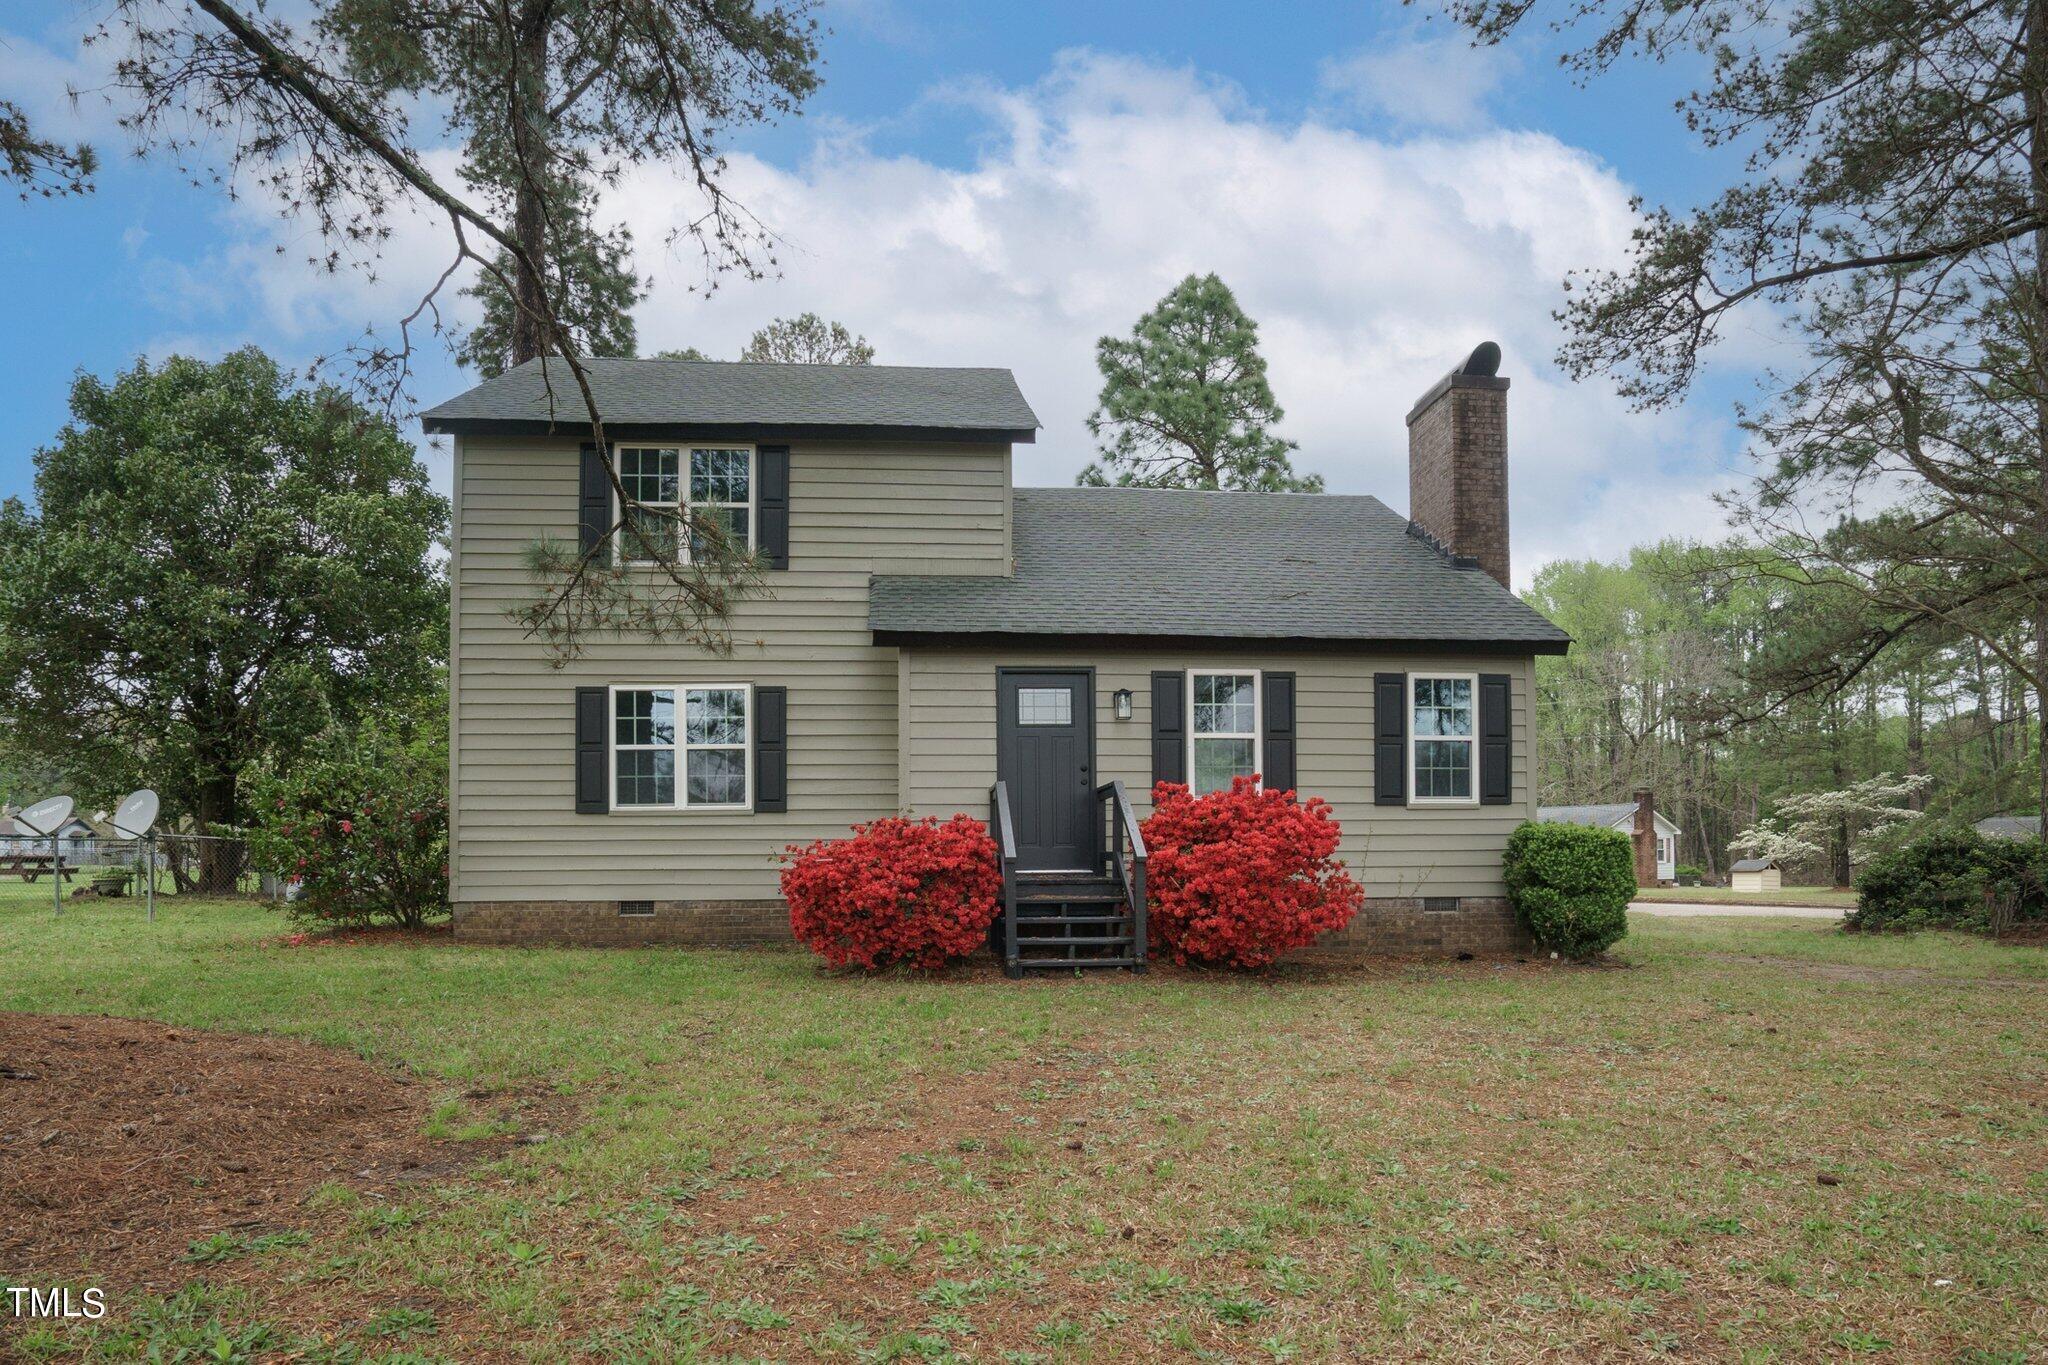 Photo one of 300 Fosteri Dr Rocky Mount NC 27801 | MLS 10021005